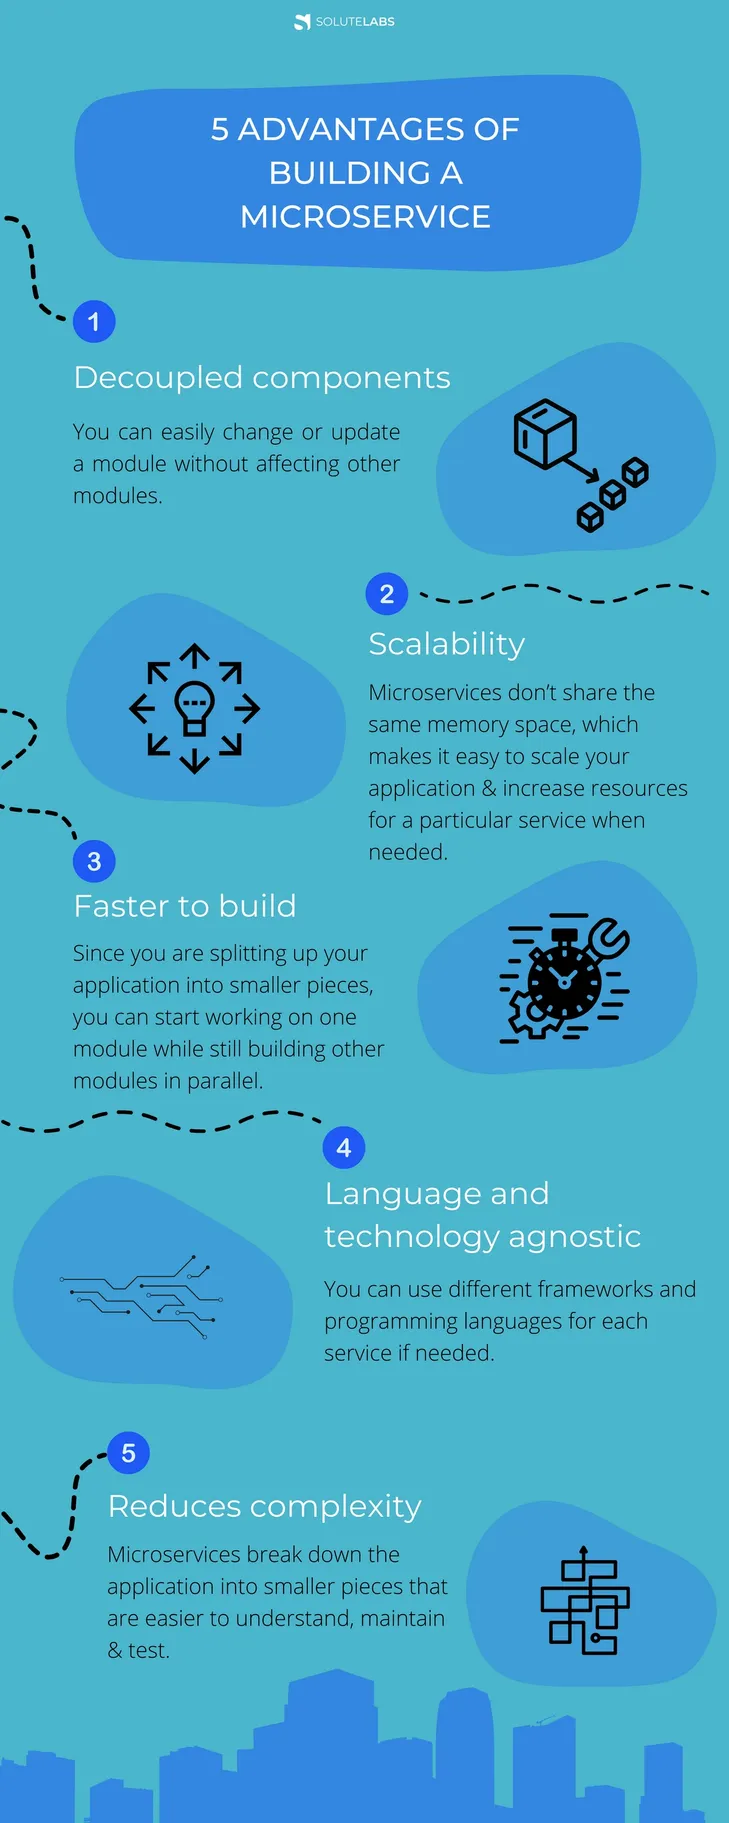 5 Advantages Of Building A Microservice